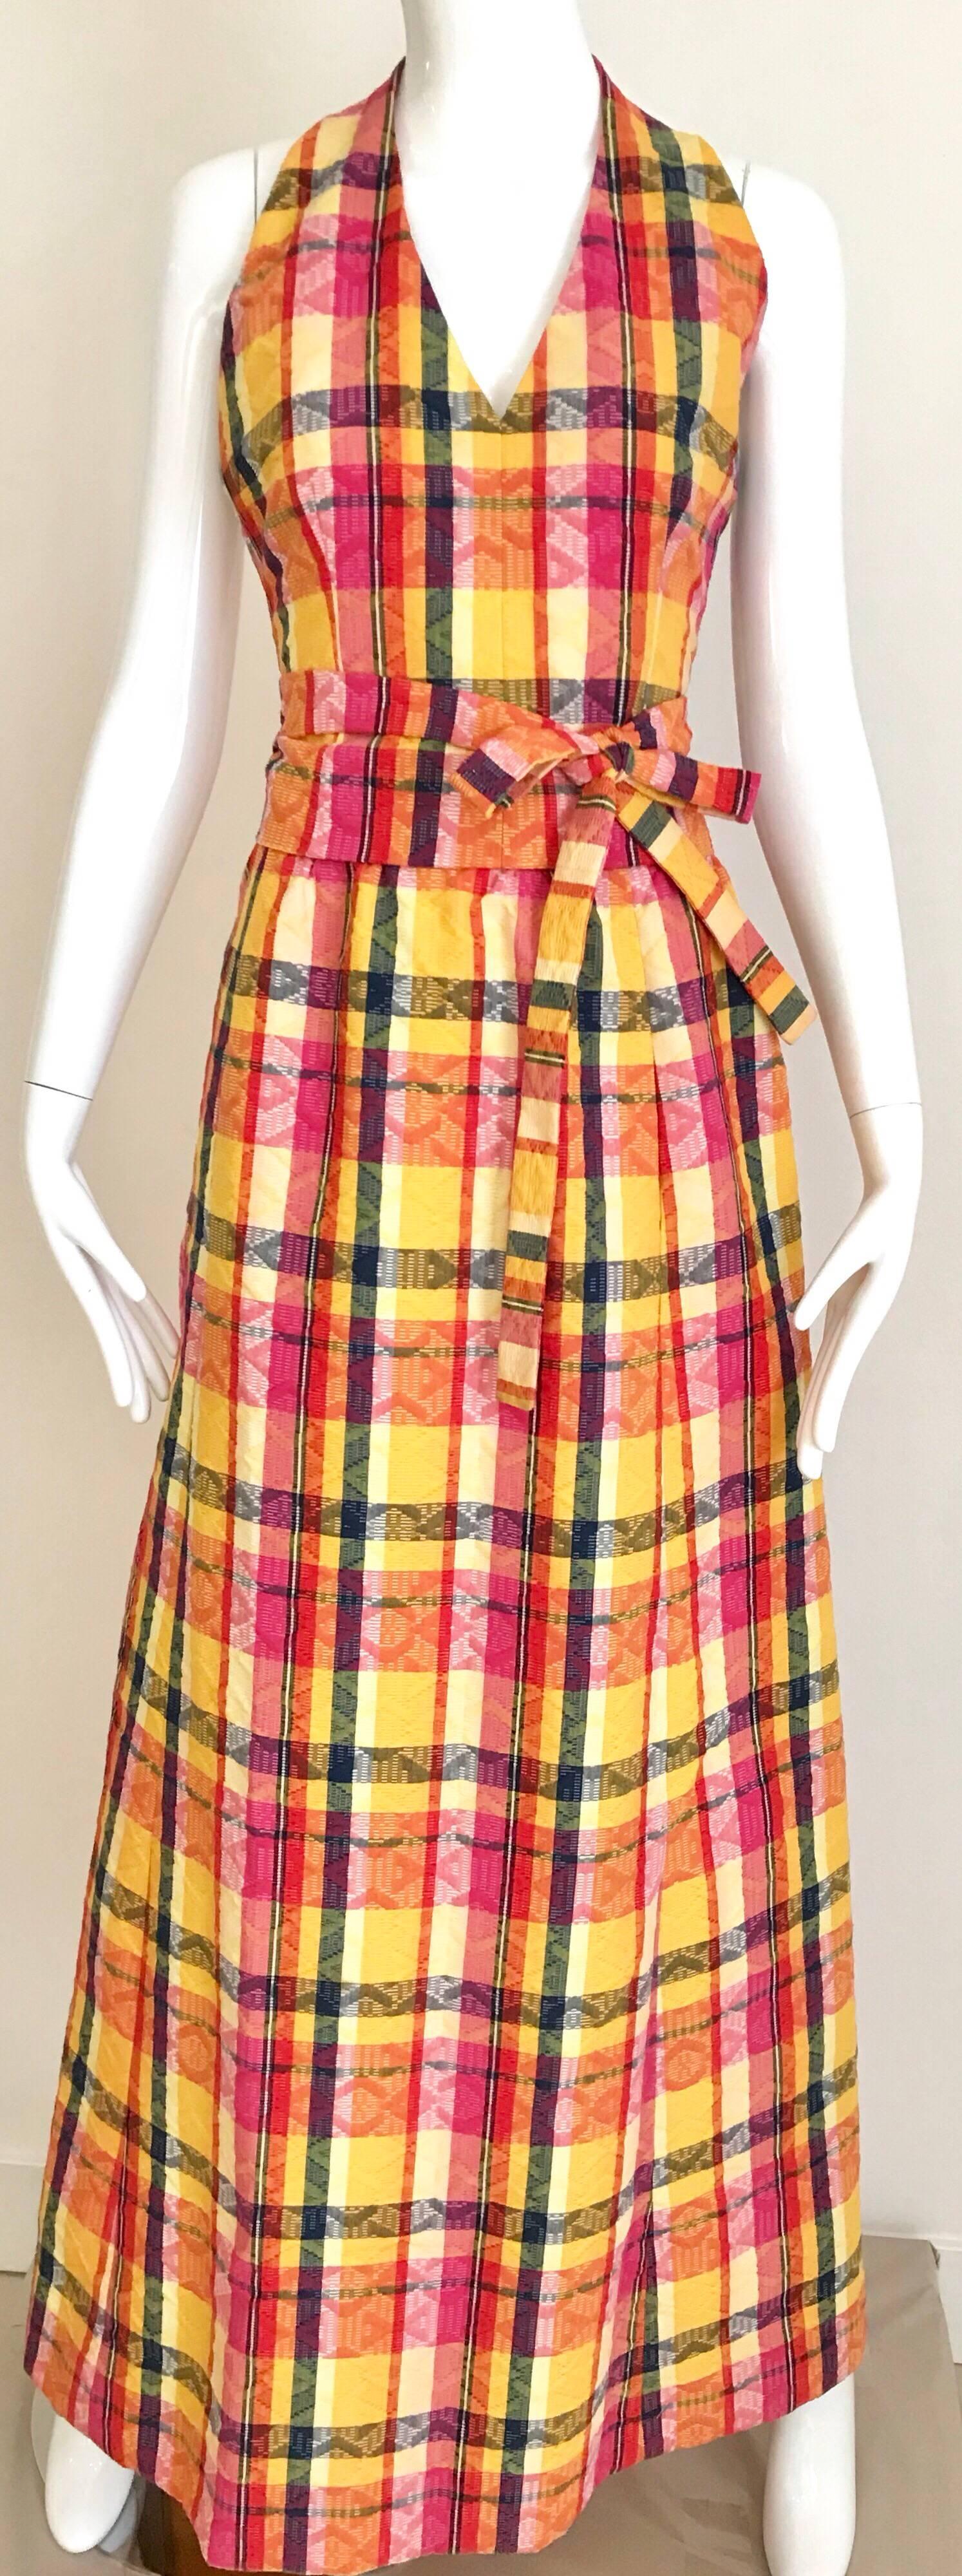 Givenchy Yellow and Orange Plaid Halter Top and Skirt set, 1970s  For Sale 2